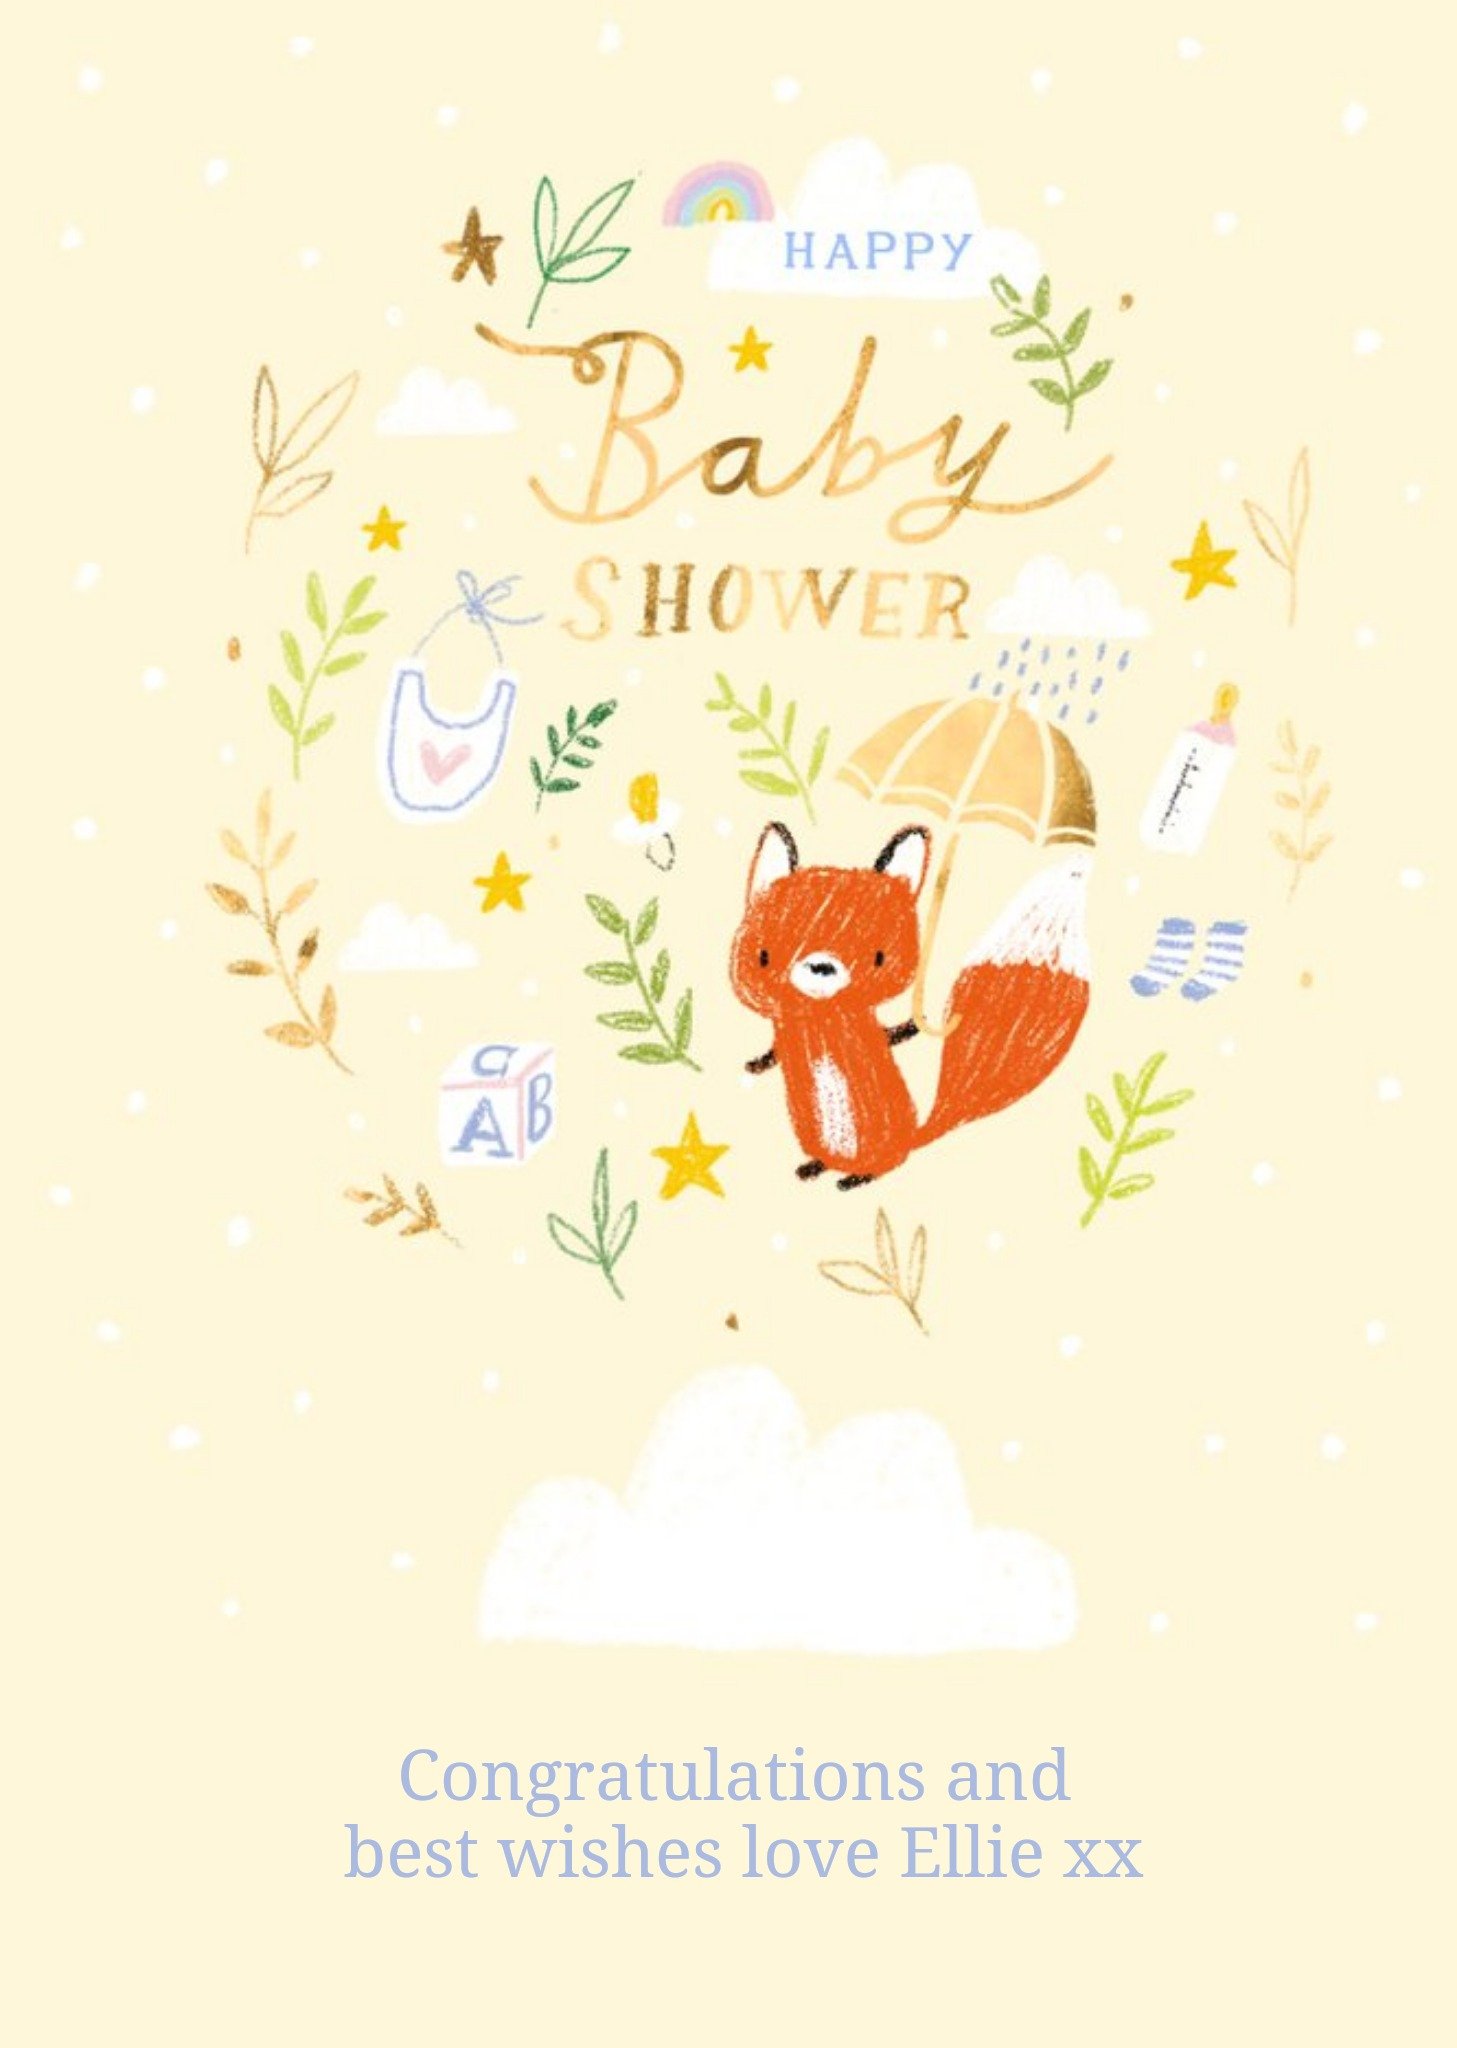 Moonpig Cute Illustration Cute Illustration Of A Fox Holding An Umbrella Personalised Card , Large